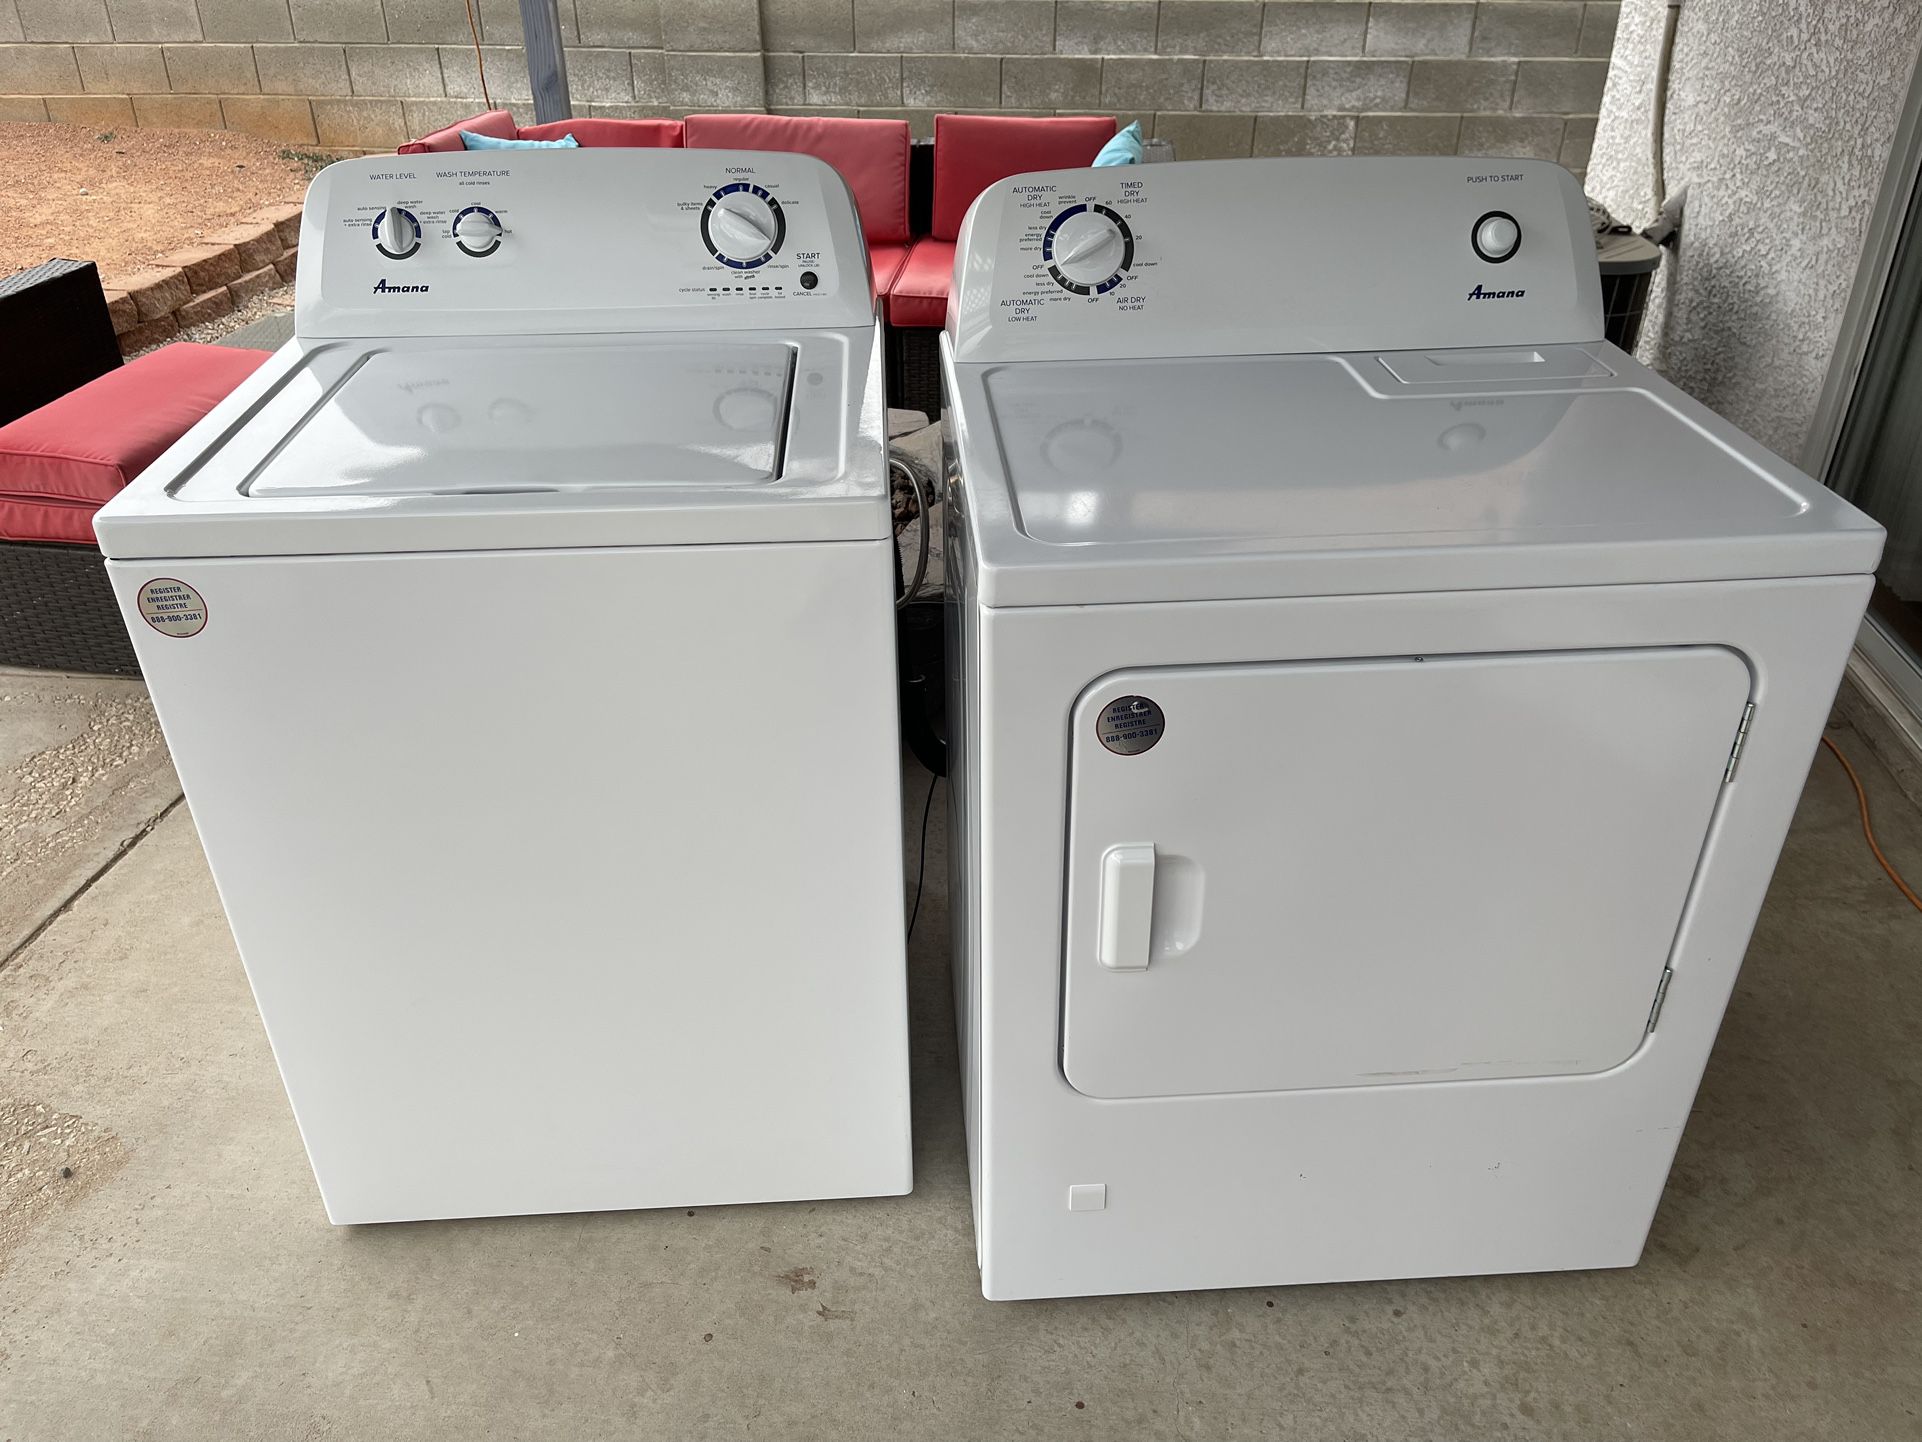 Gas - Amana Washer And Dryer Set 